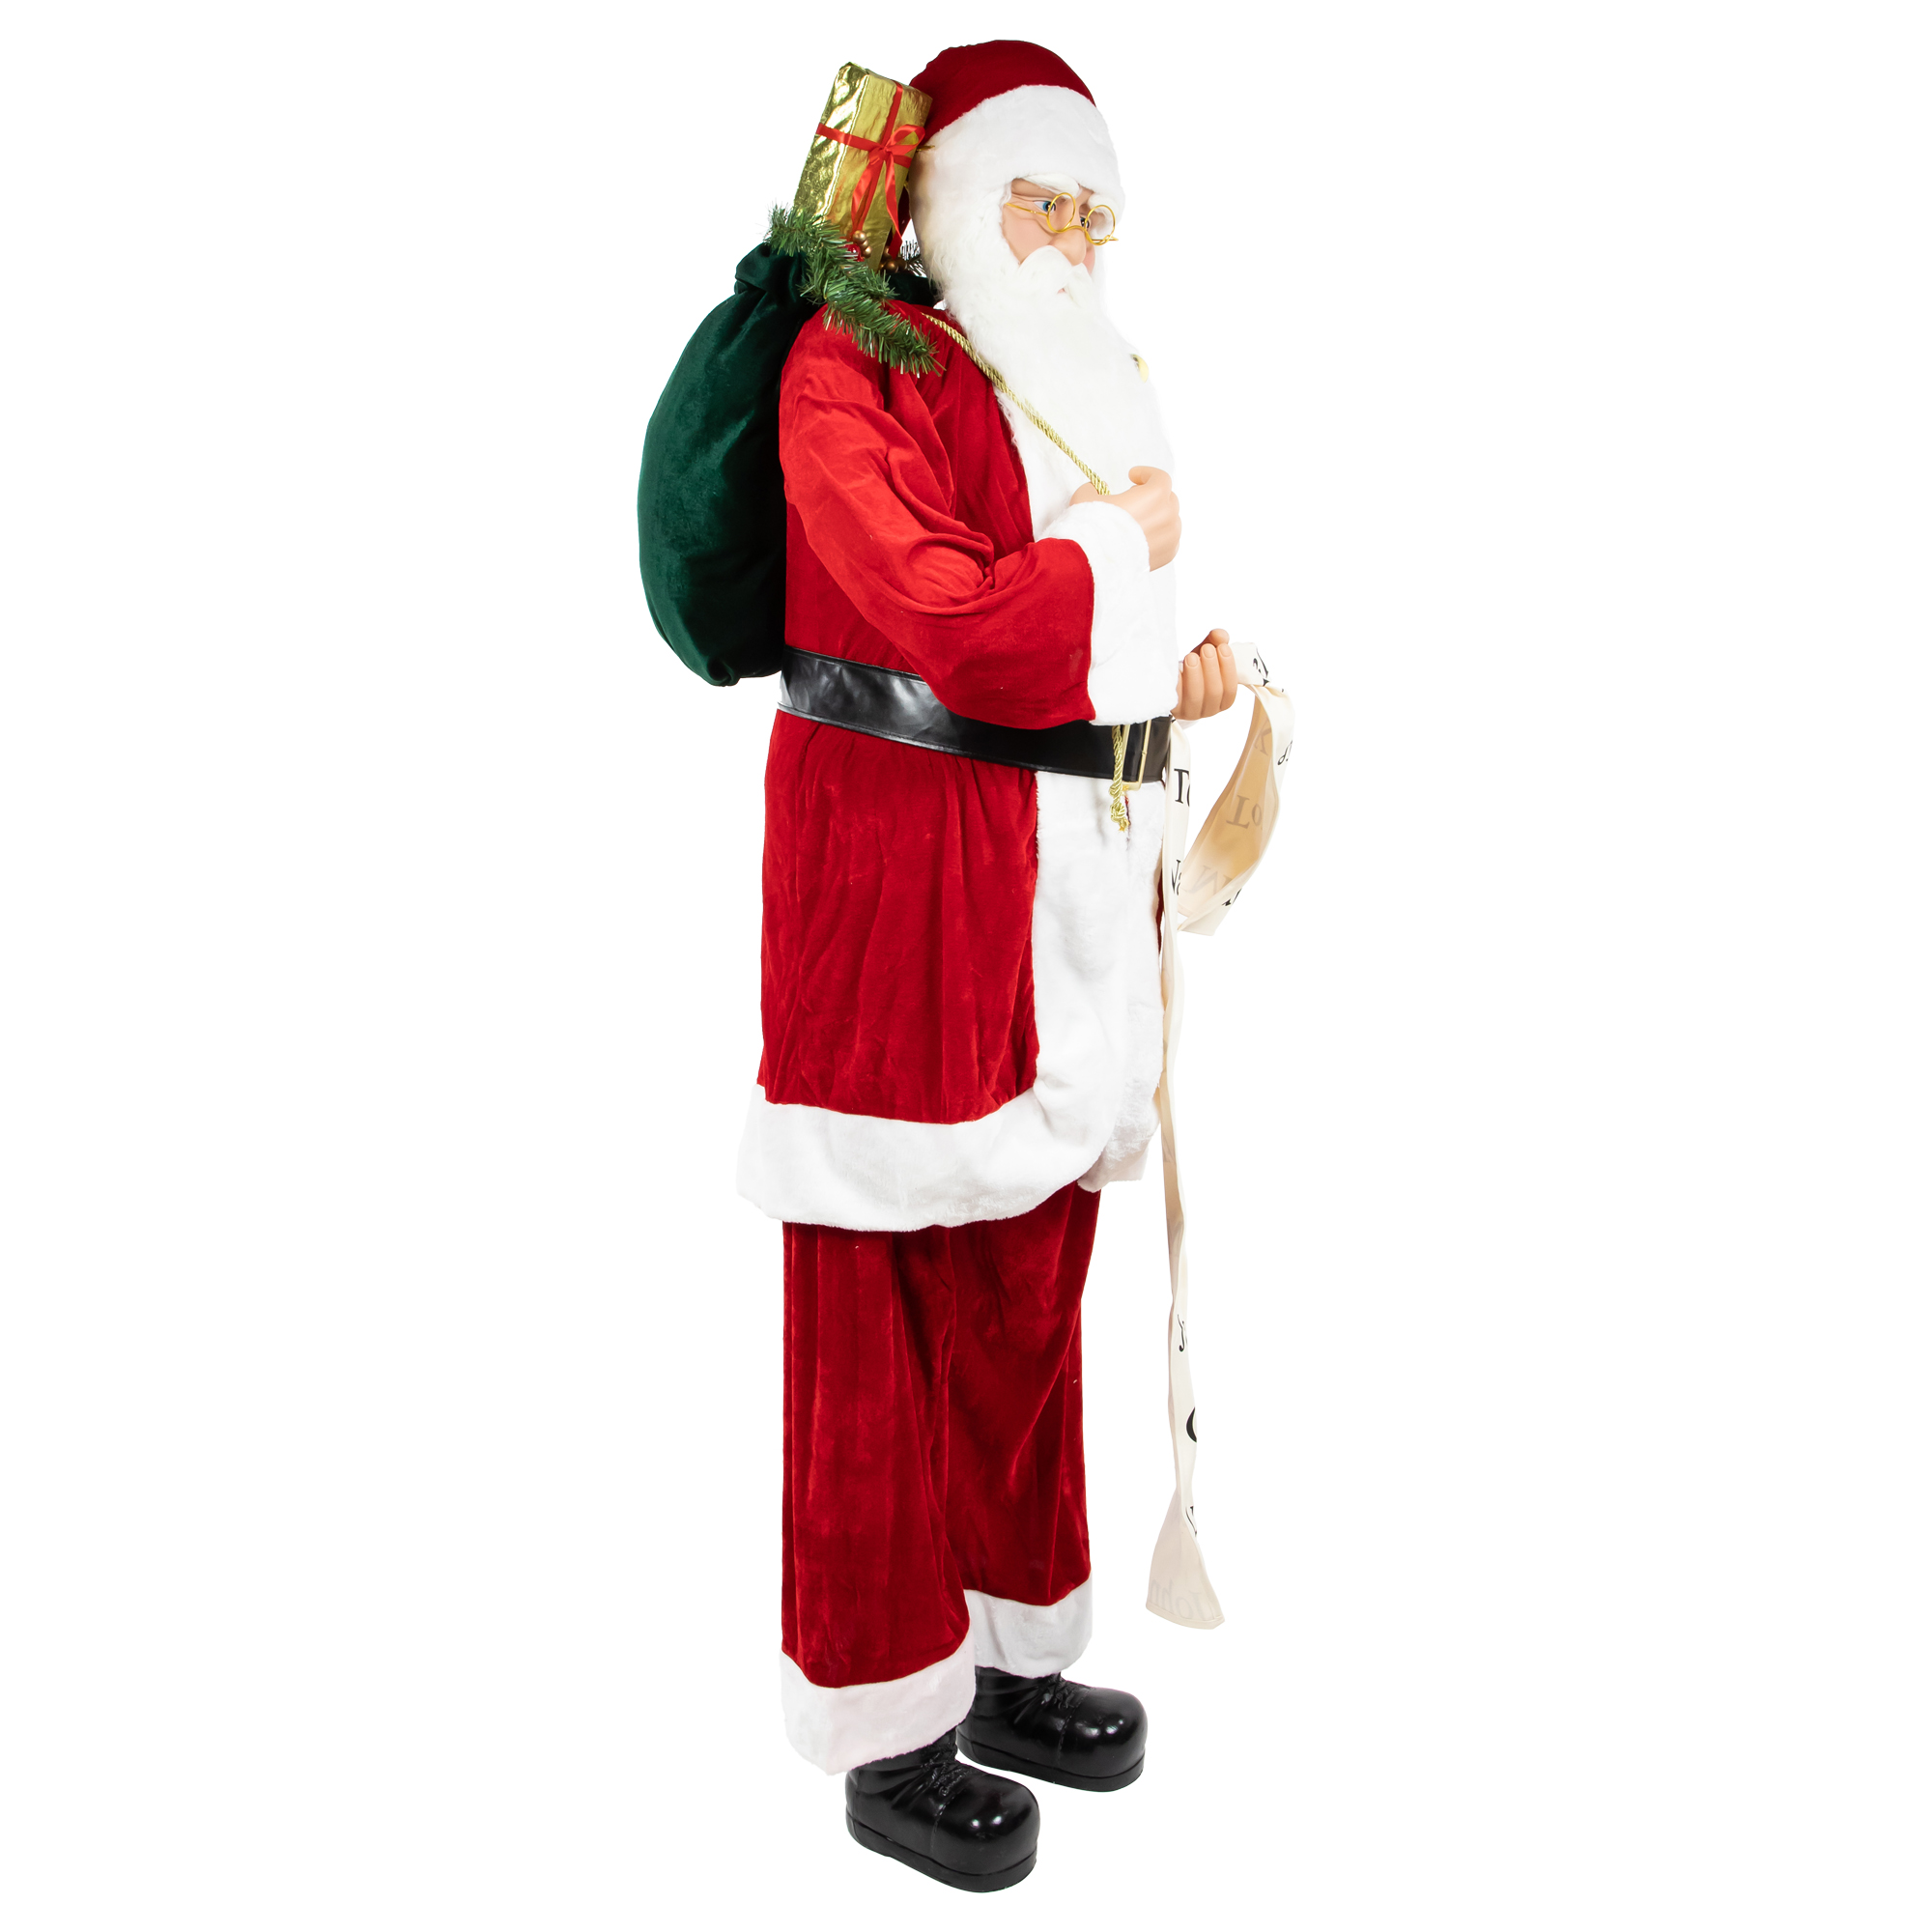 Northlight 72" Red and White Santa Claus with Naughty or Nice List Christmas Figure